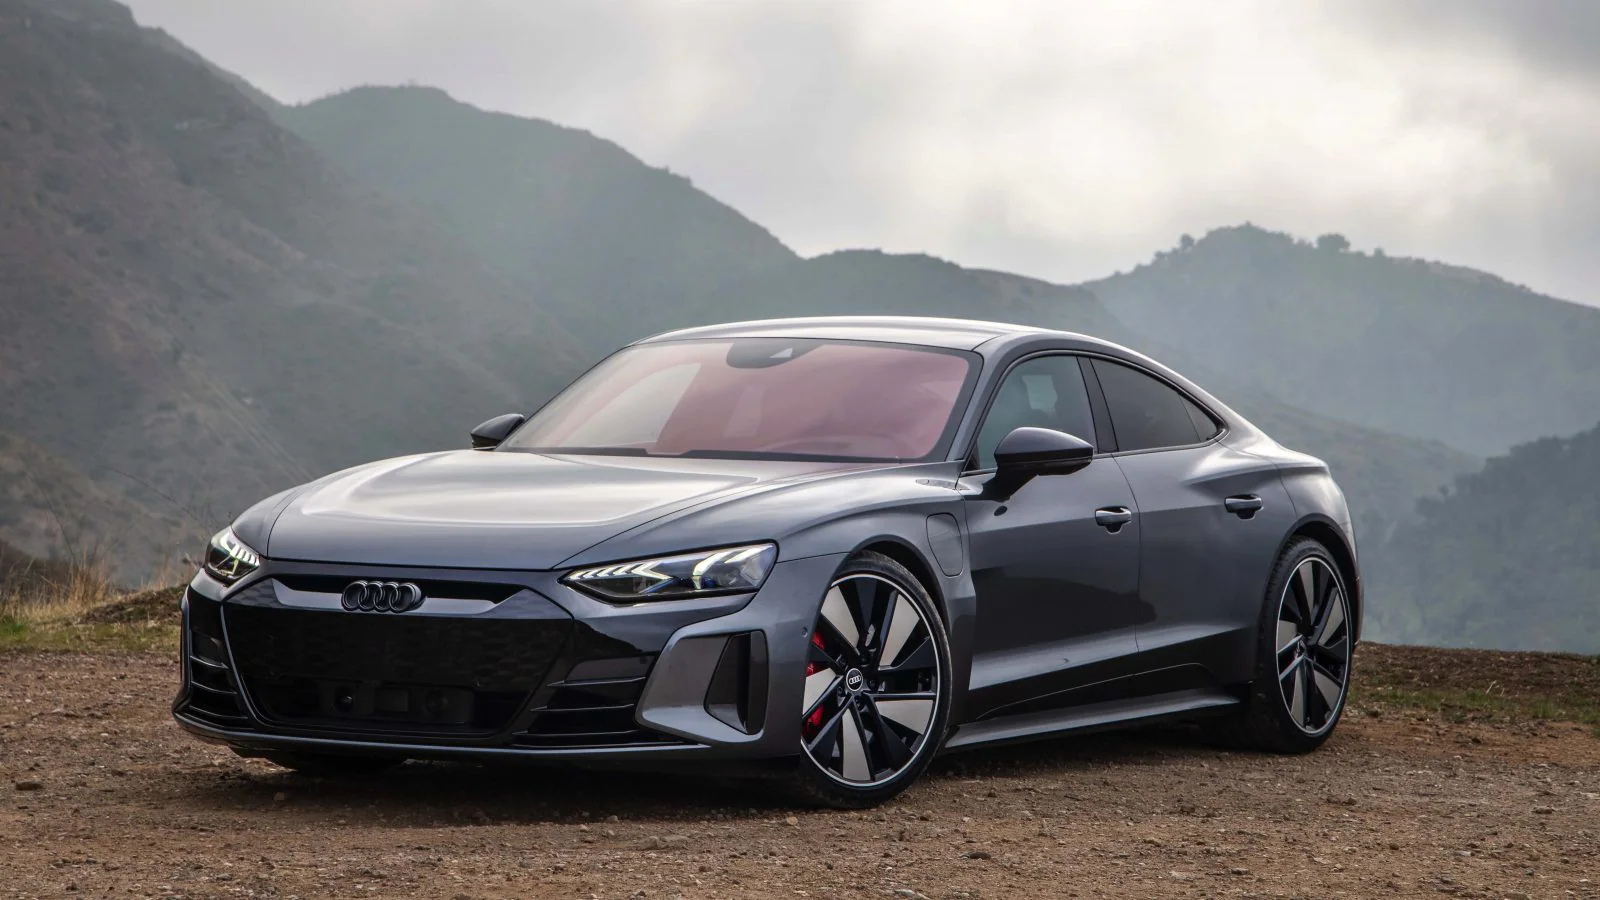 2022 Audi e-tron gt on a hill in grey